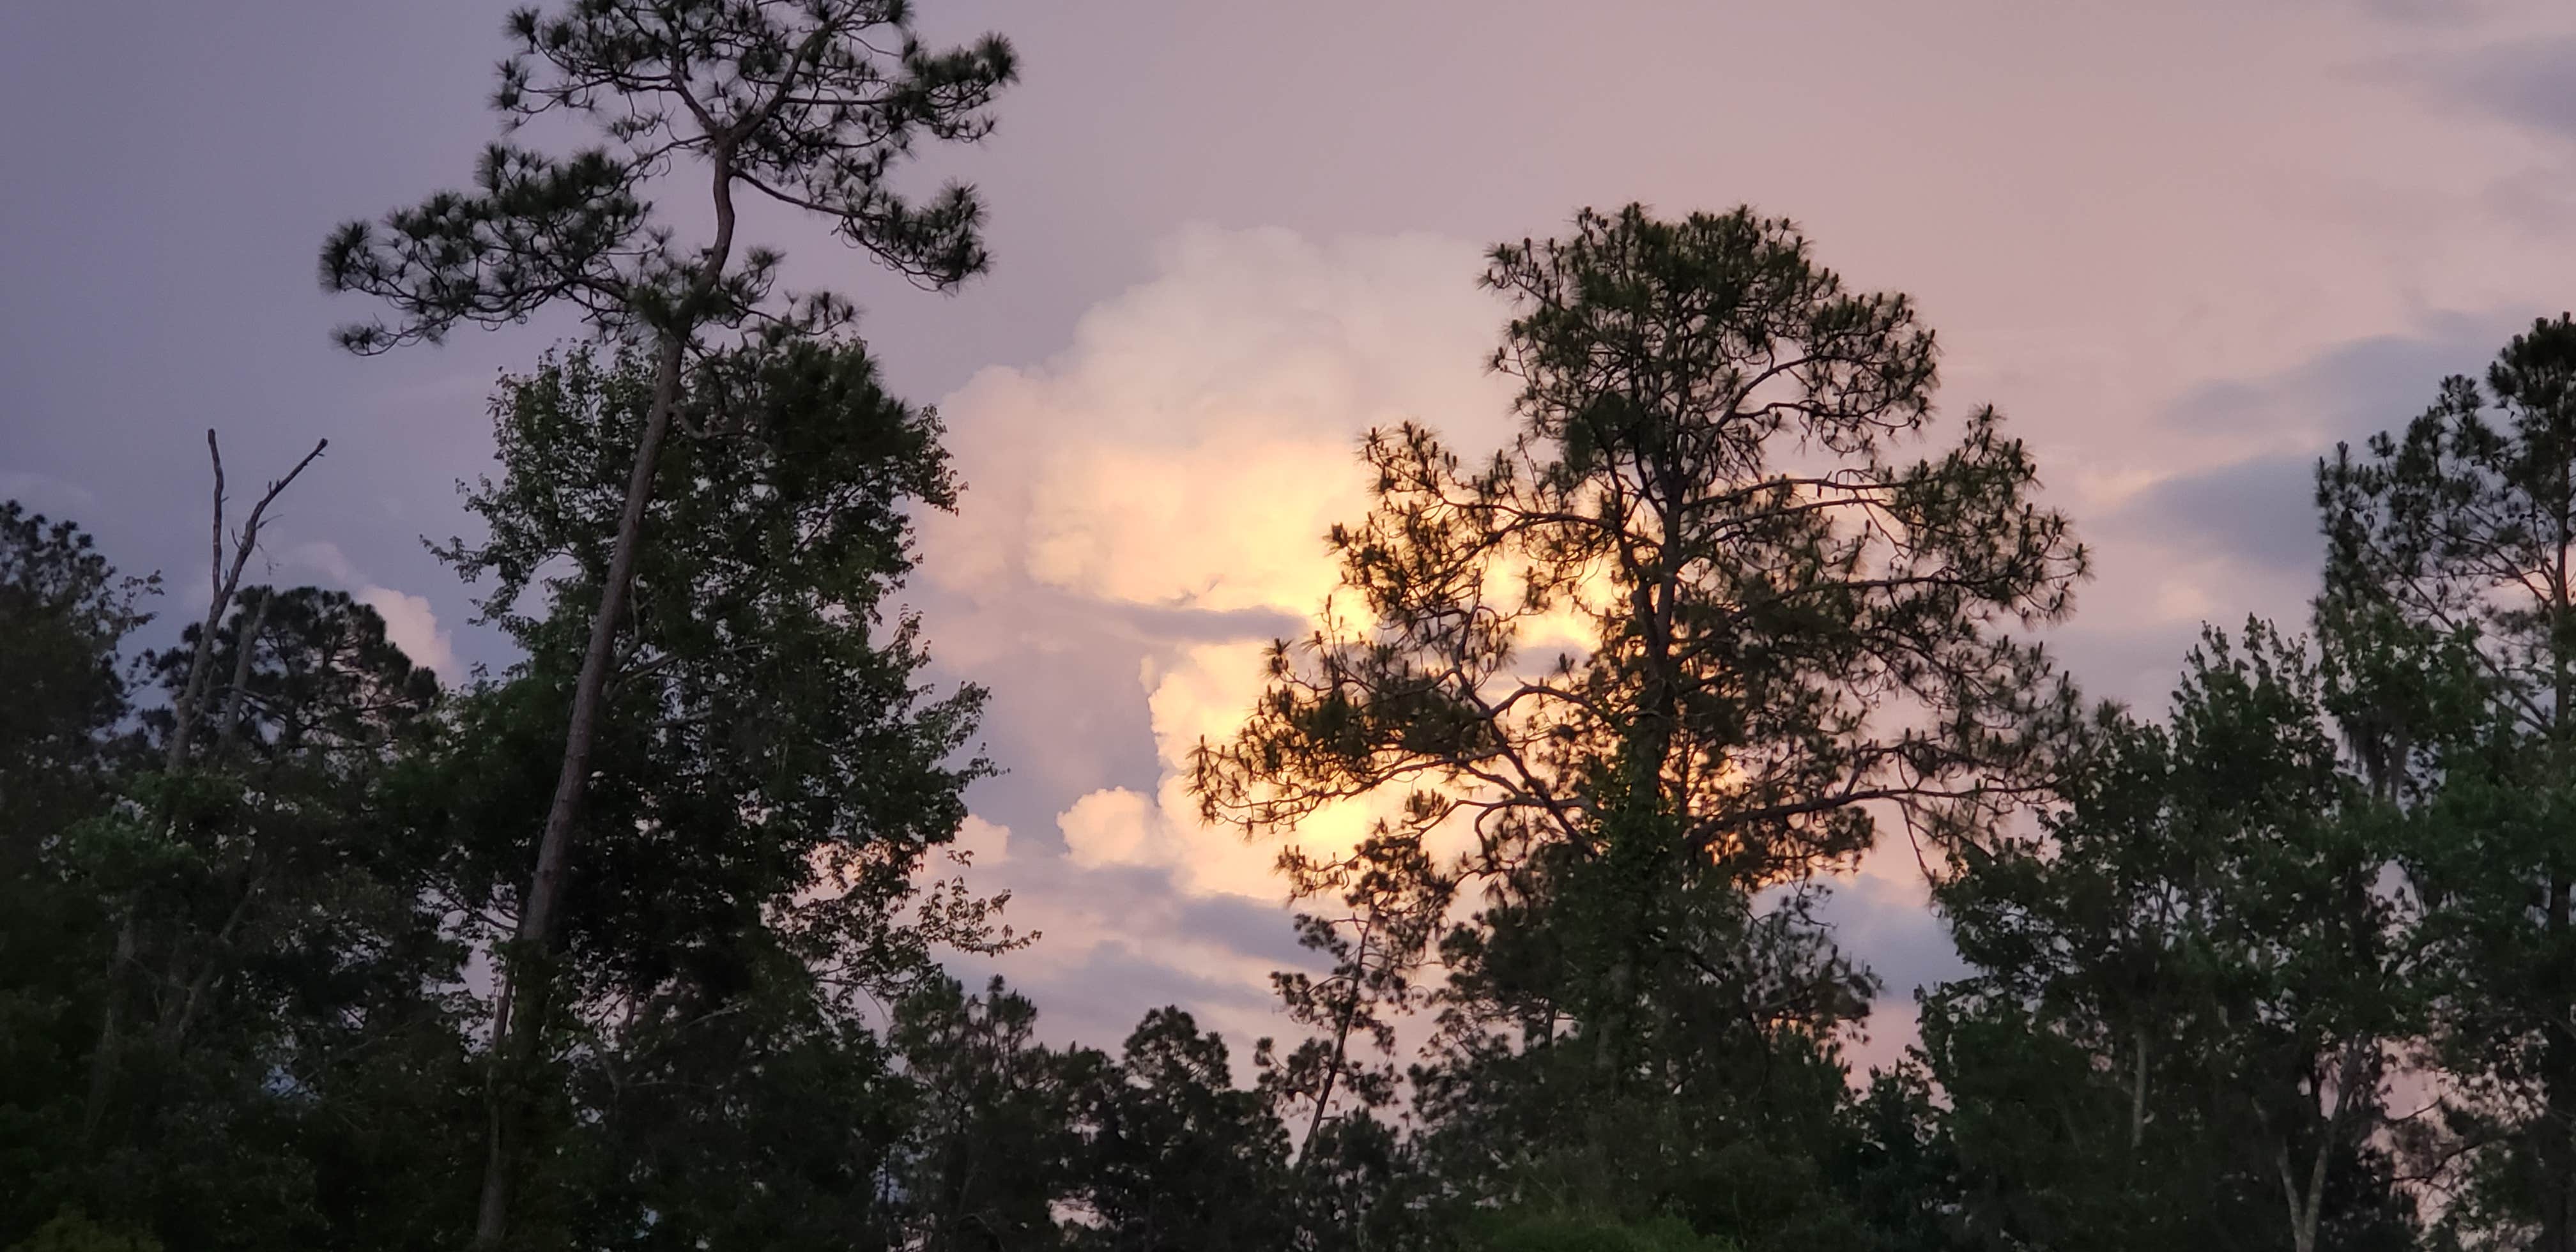 Stormy Sunset - rained all around - never on us :-)